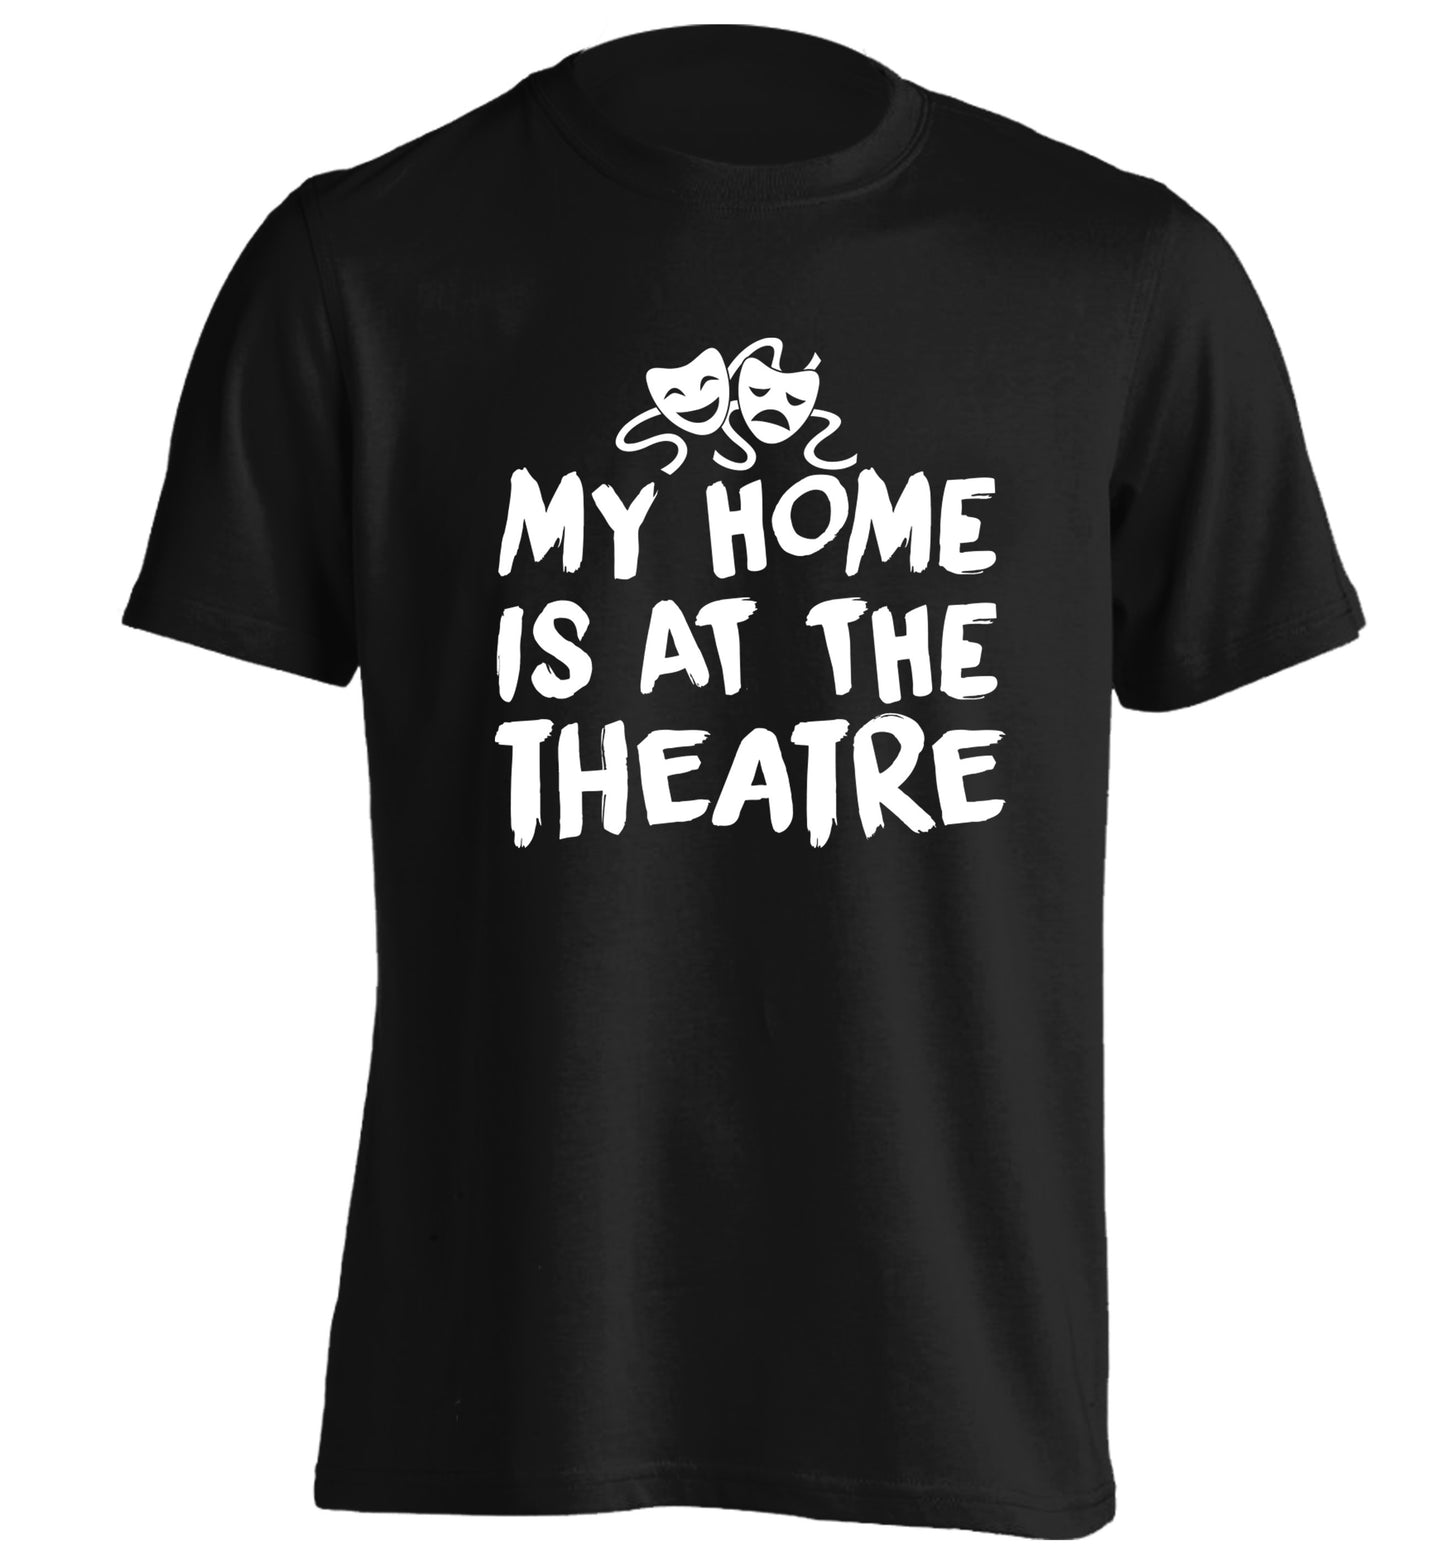 My home is at the theatre adults unisex black Tshirt 2XL